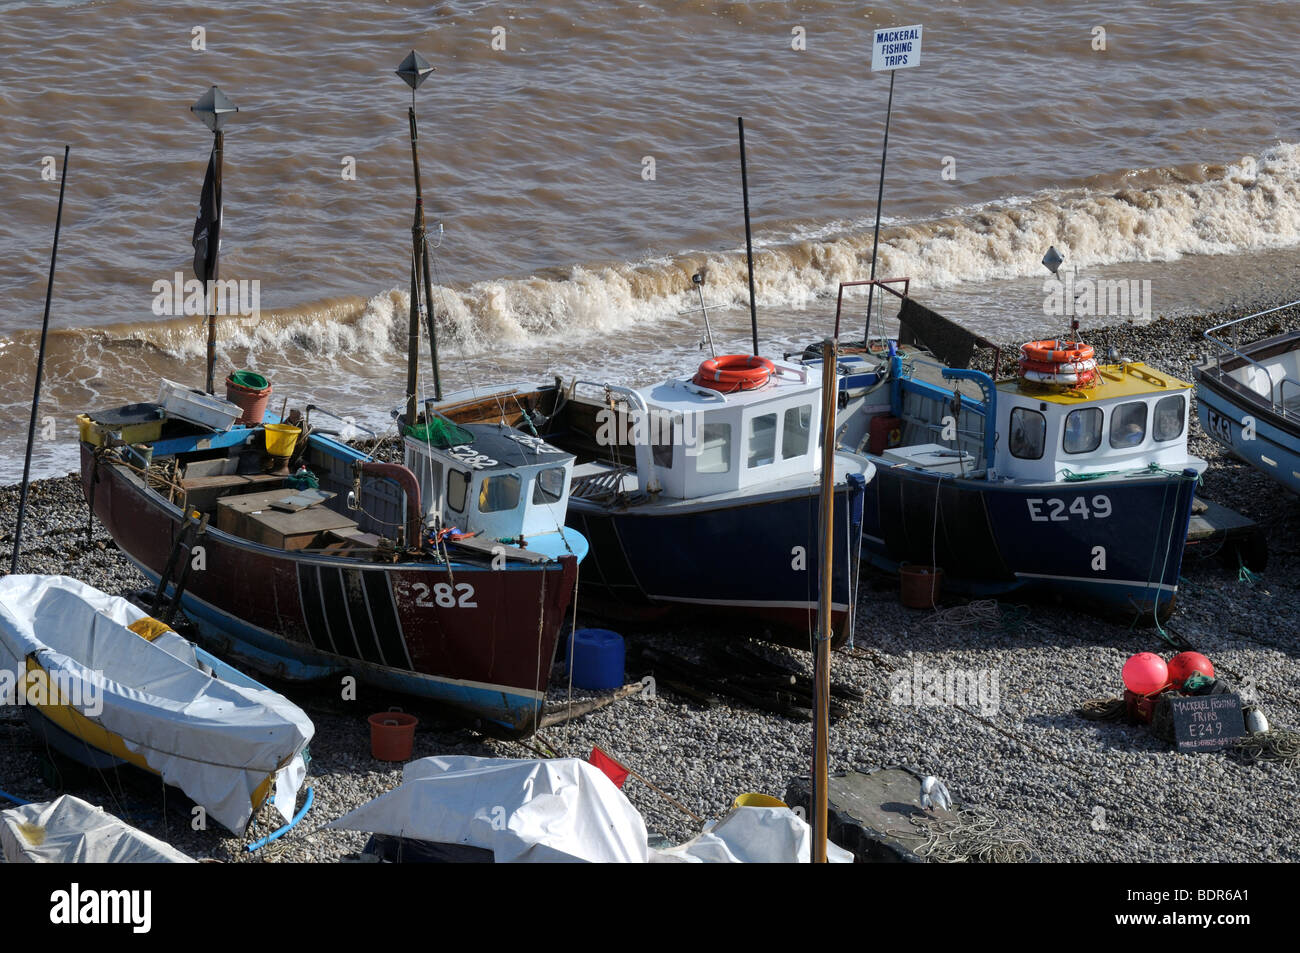 Fishing boats on the beach at Beer Devon England Stock Photo